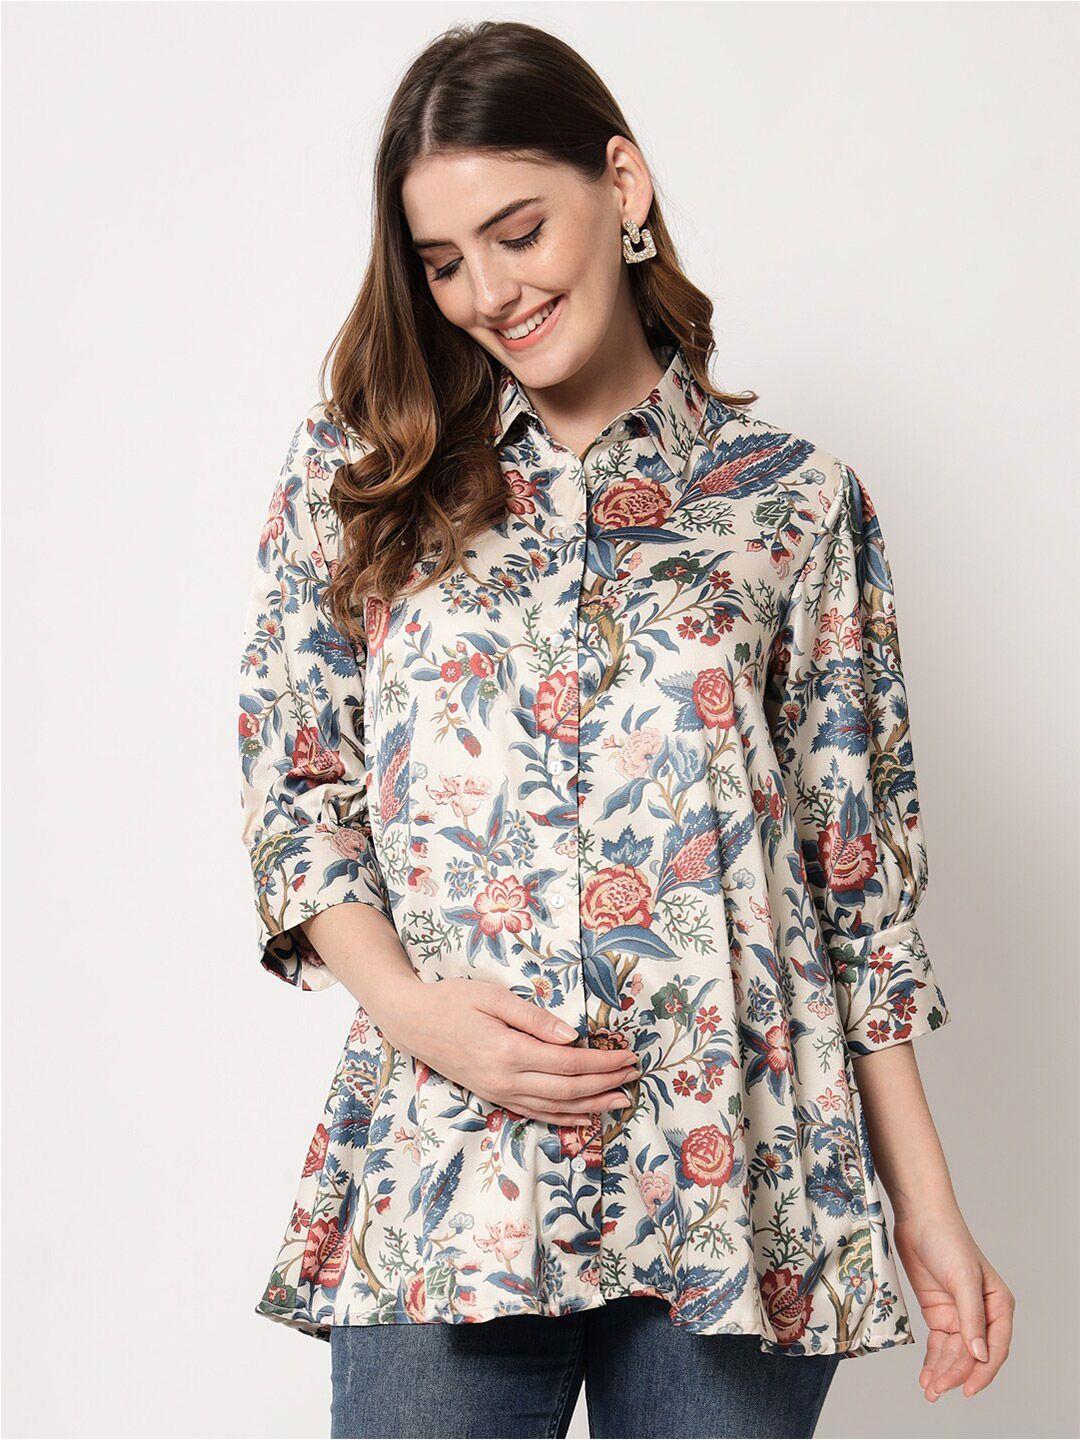 angloindu floral print shirt style maternity top